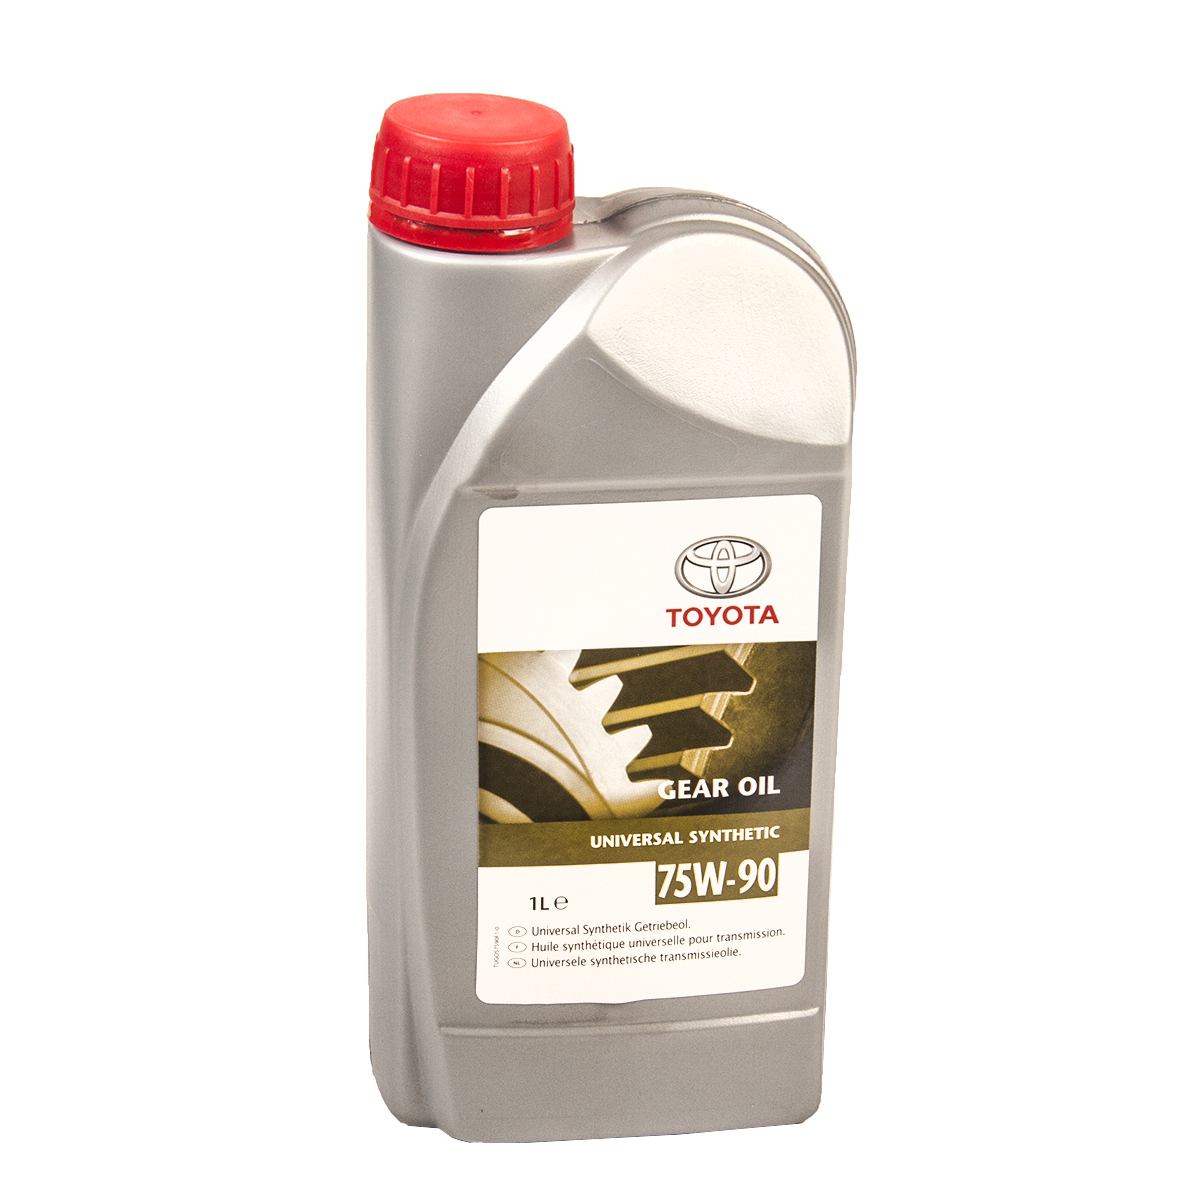 75w-90 Differential Gear Oil API gl-5, 1л (синт. транс. масло) - Toyota 08885-81592